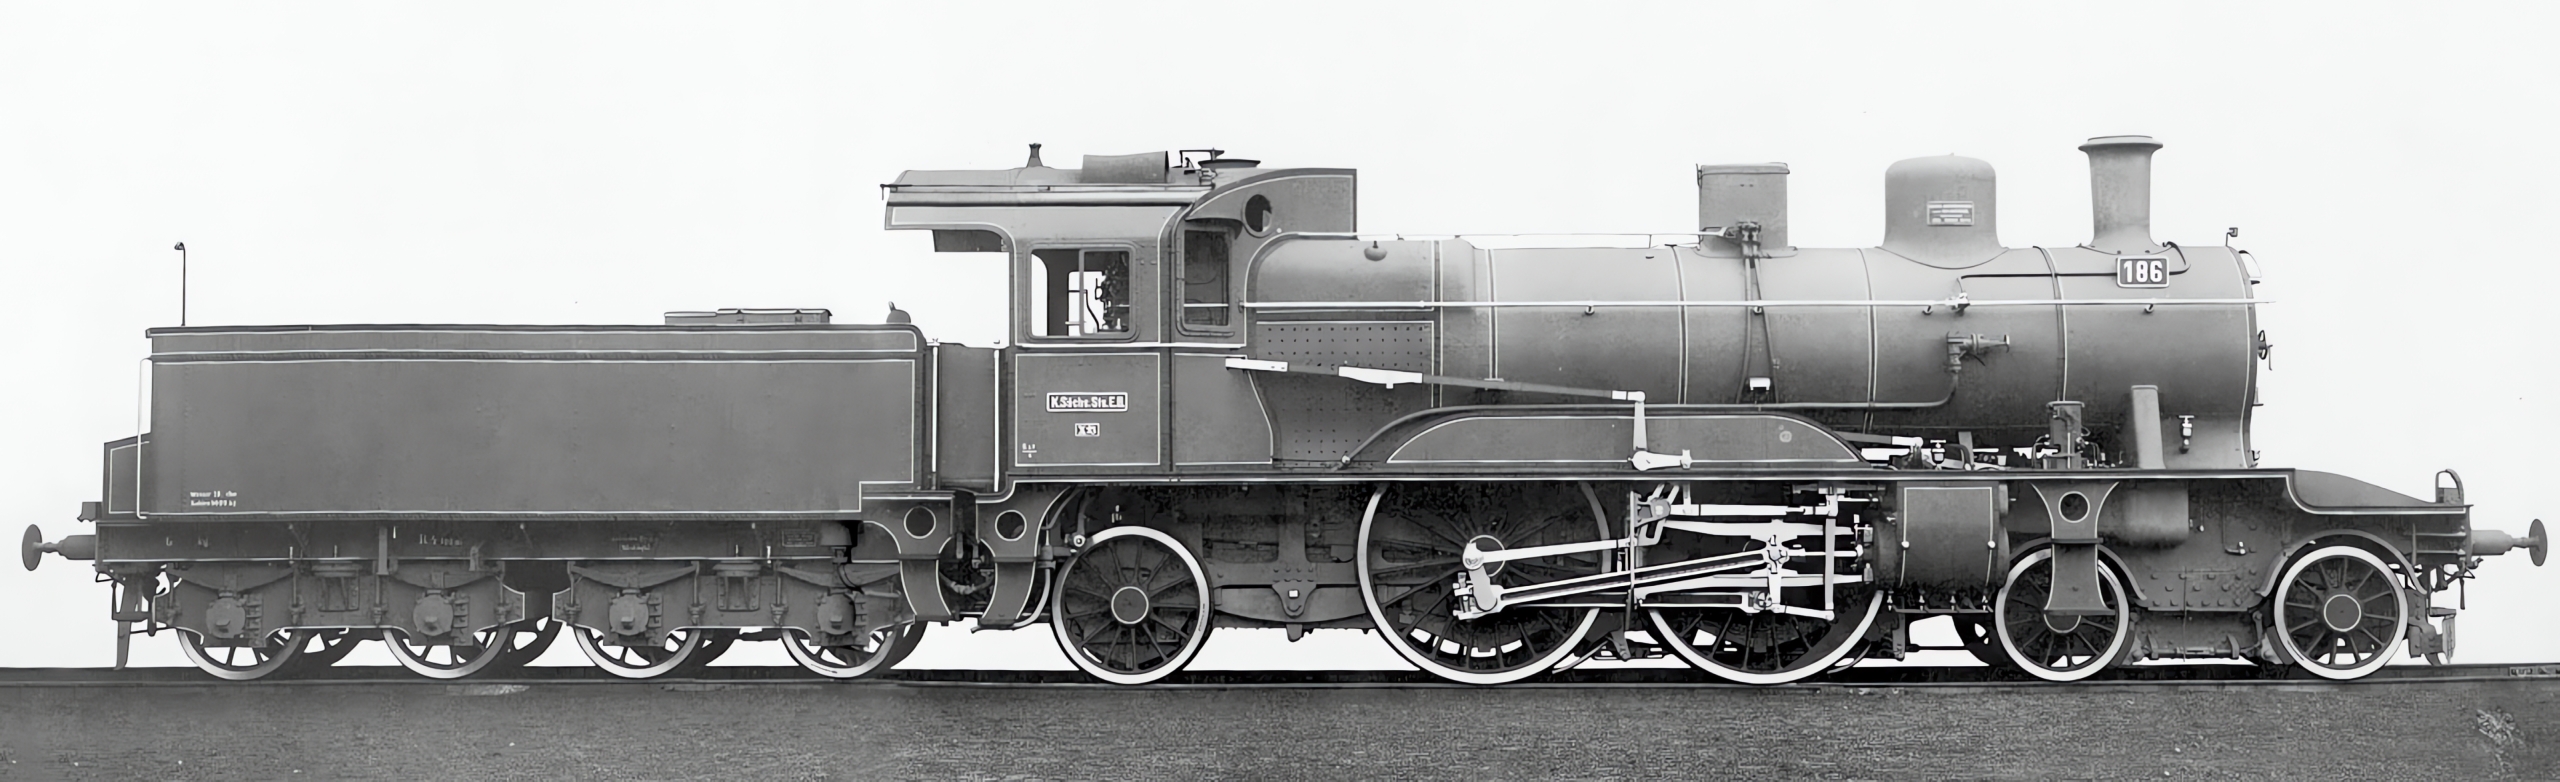 No. 186 on a works photo when it was delivered in 1902